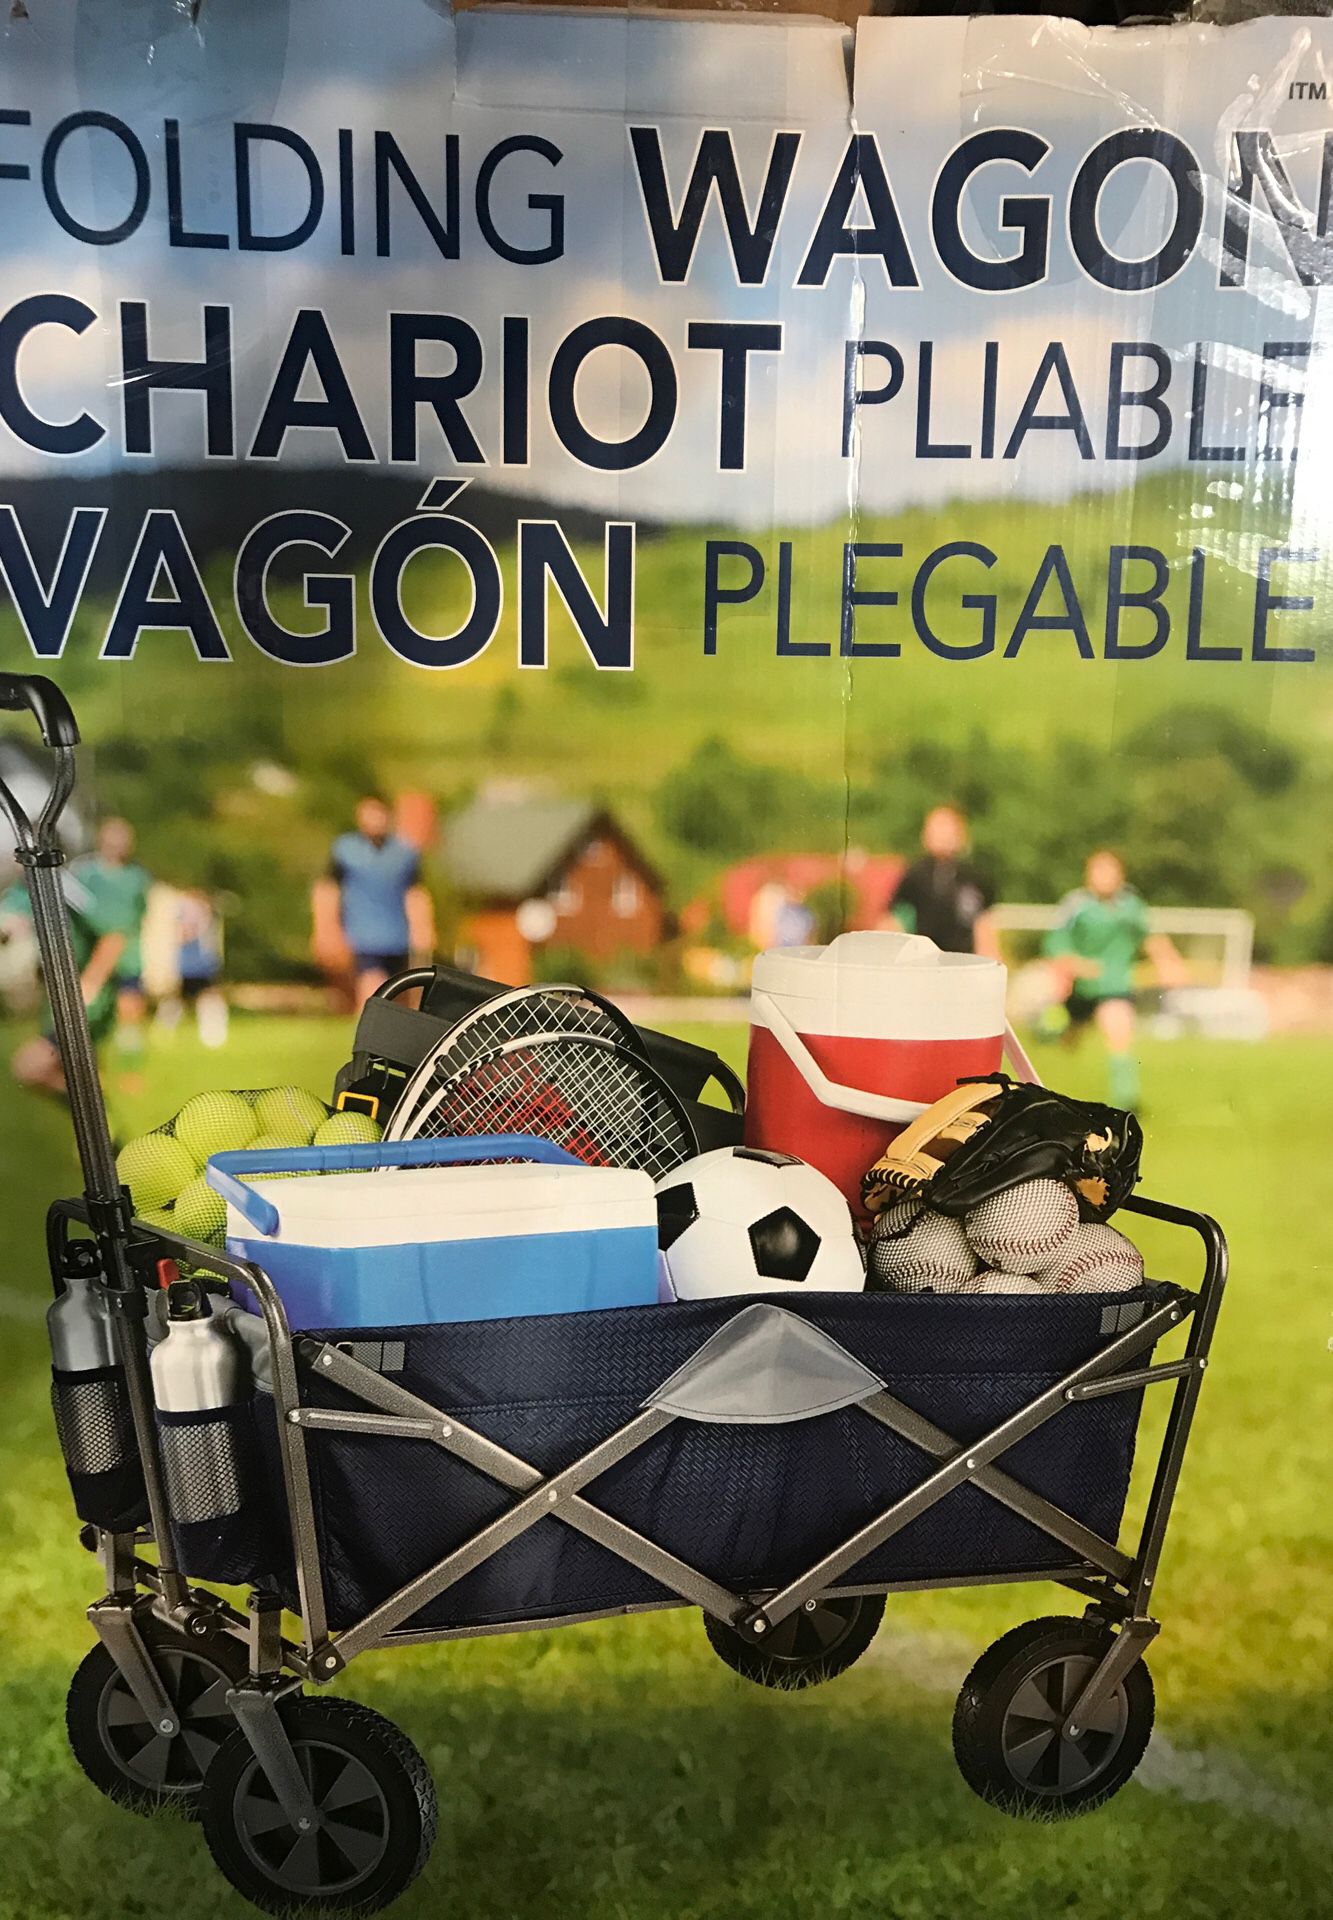 Folding wagon chariot pliable vagón plegable for only 39.99 instead of 69.99 at The House Depot 🏡